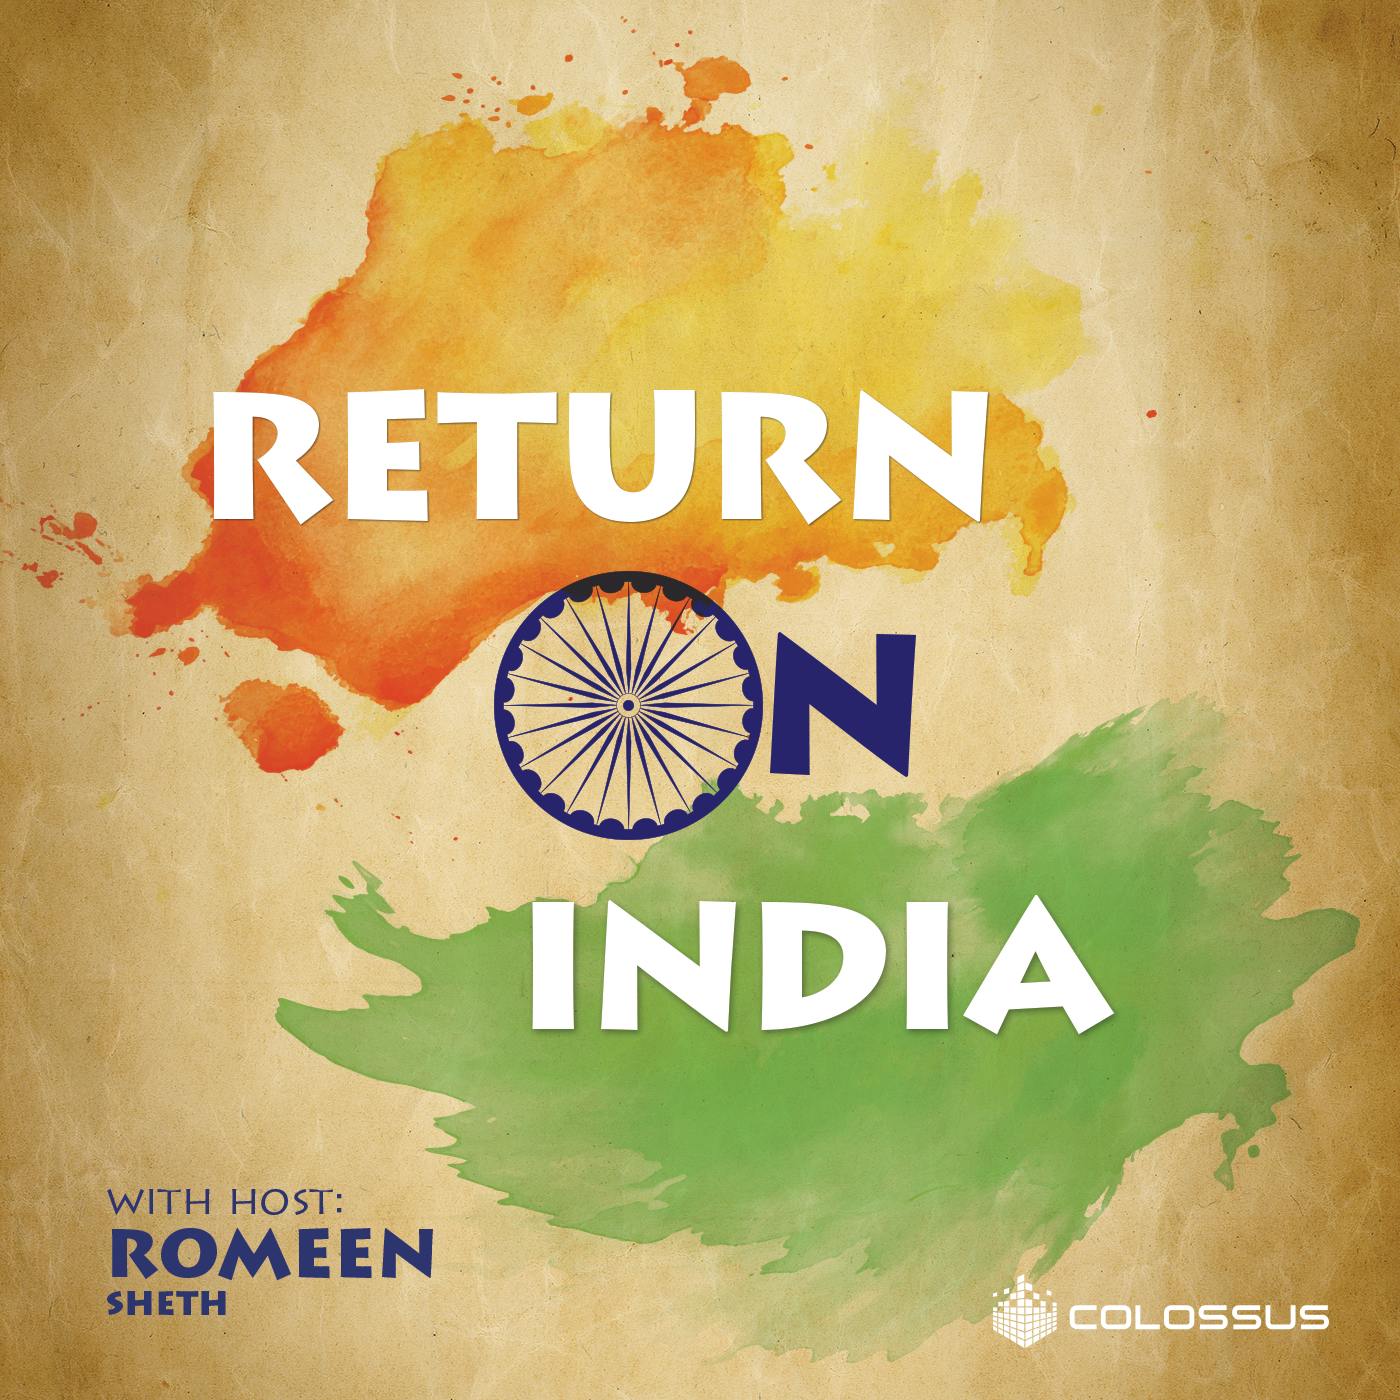 Welcome to Return on India